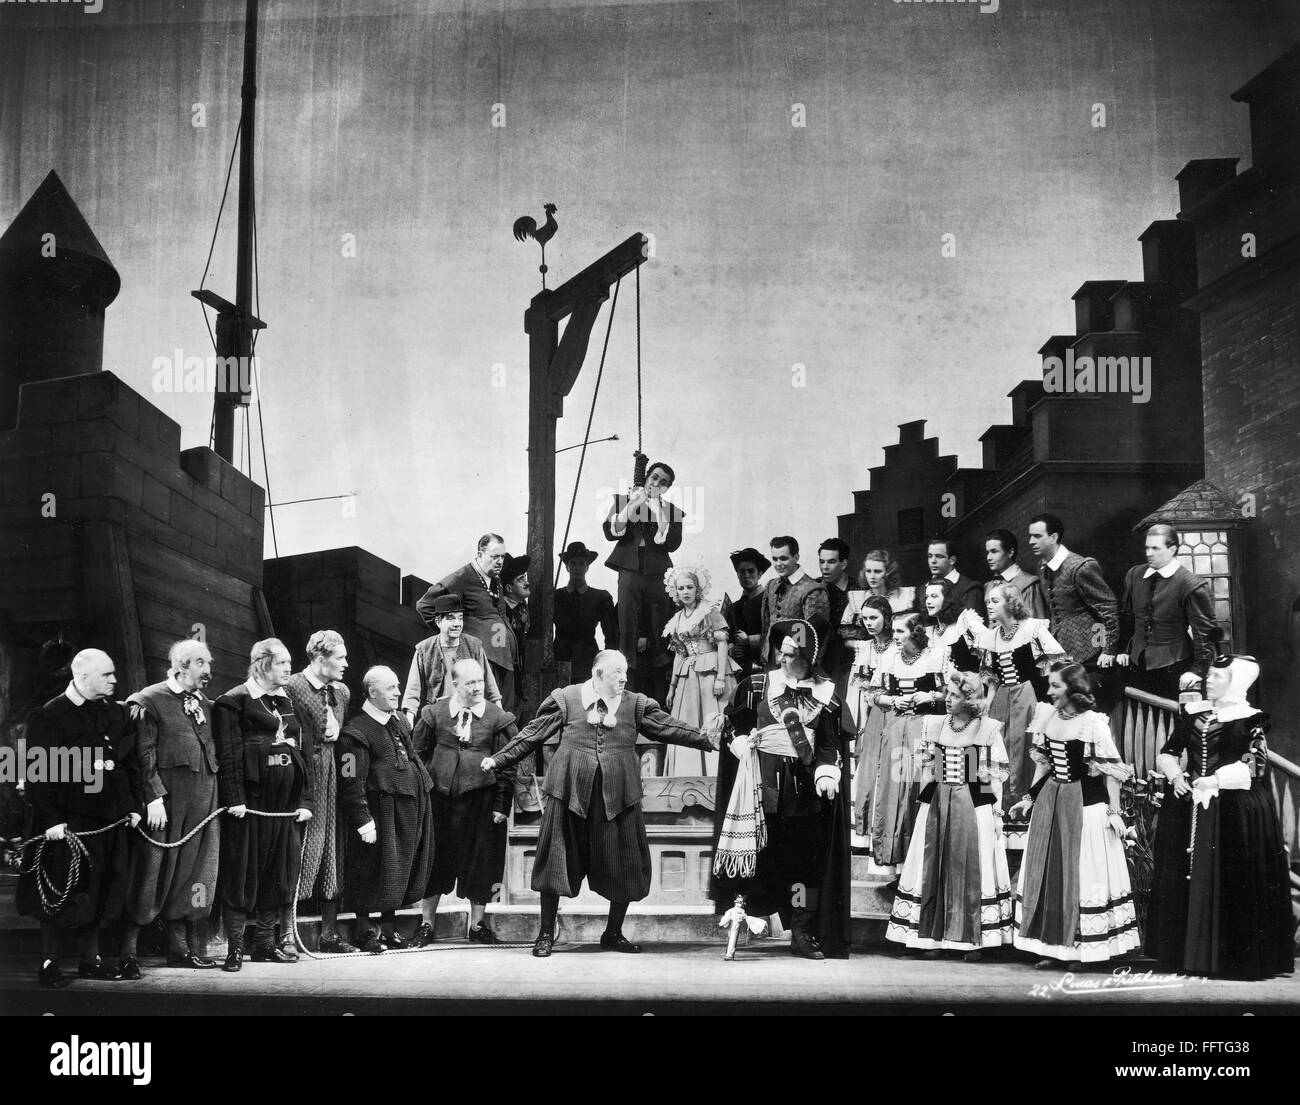 KNICKERBOCKER HOLIDAY. /nScene from the musical 'Knickerbocker Holiday' by Maxwell Anderson and Kurt Weill, directed on Broadway by Joshua Logan, 1938. Stock Photo